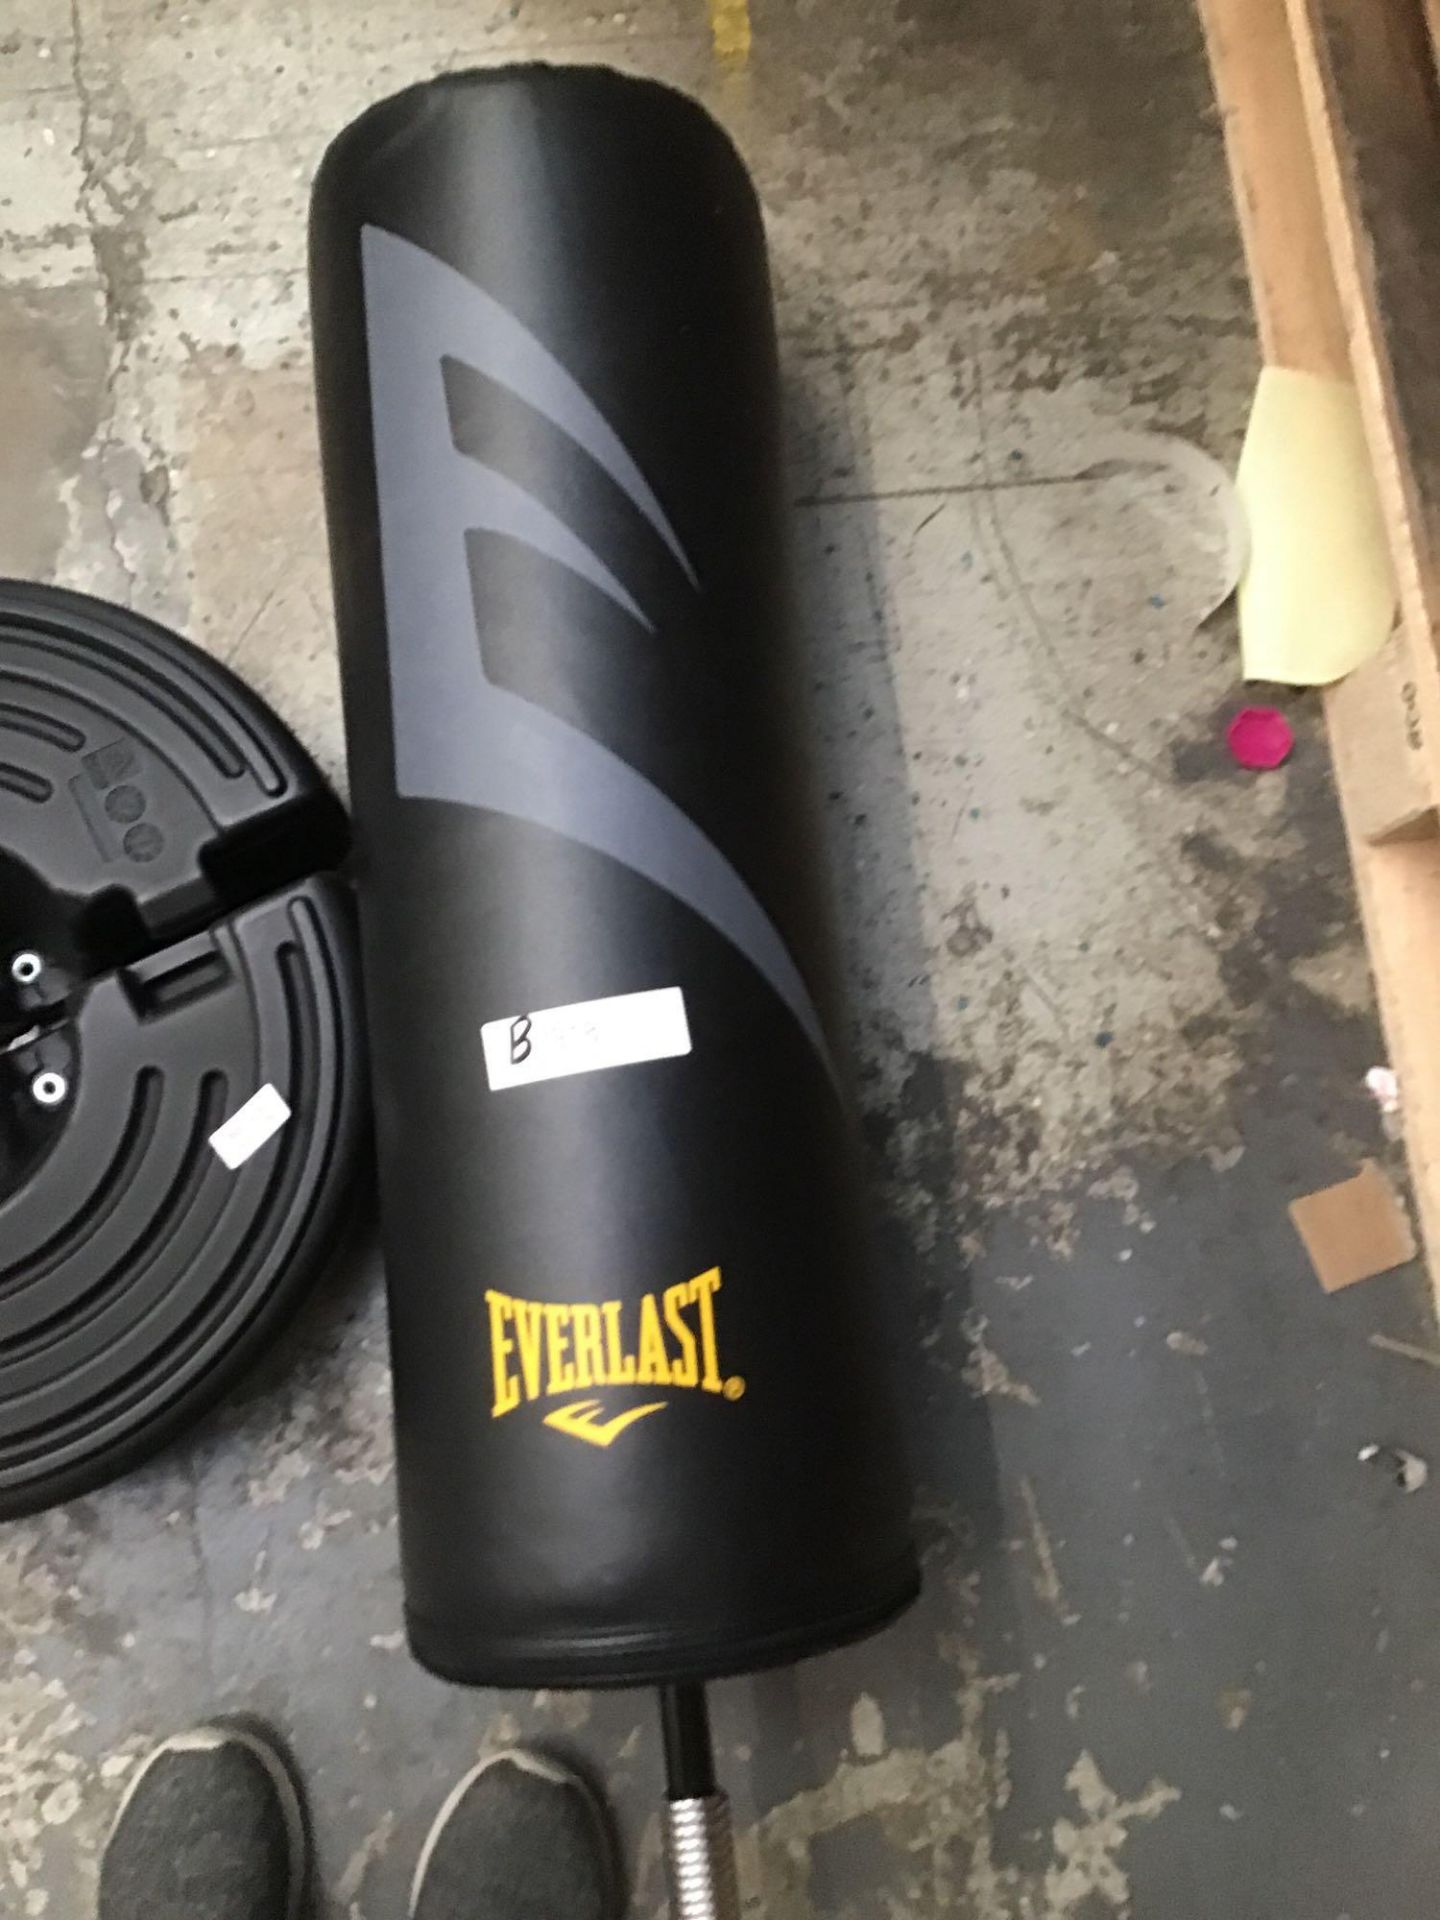 Everlast Cardio Fitness Punch Bag 725/3867 £59.99 RRP - Image 2 of 5